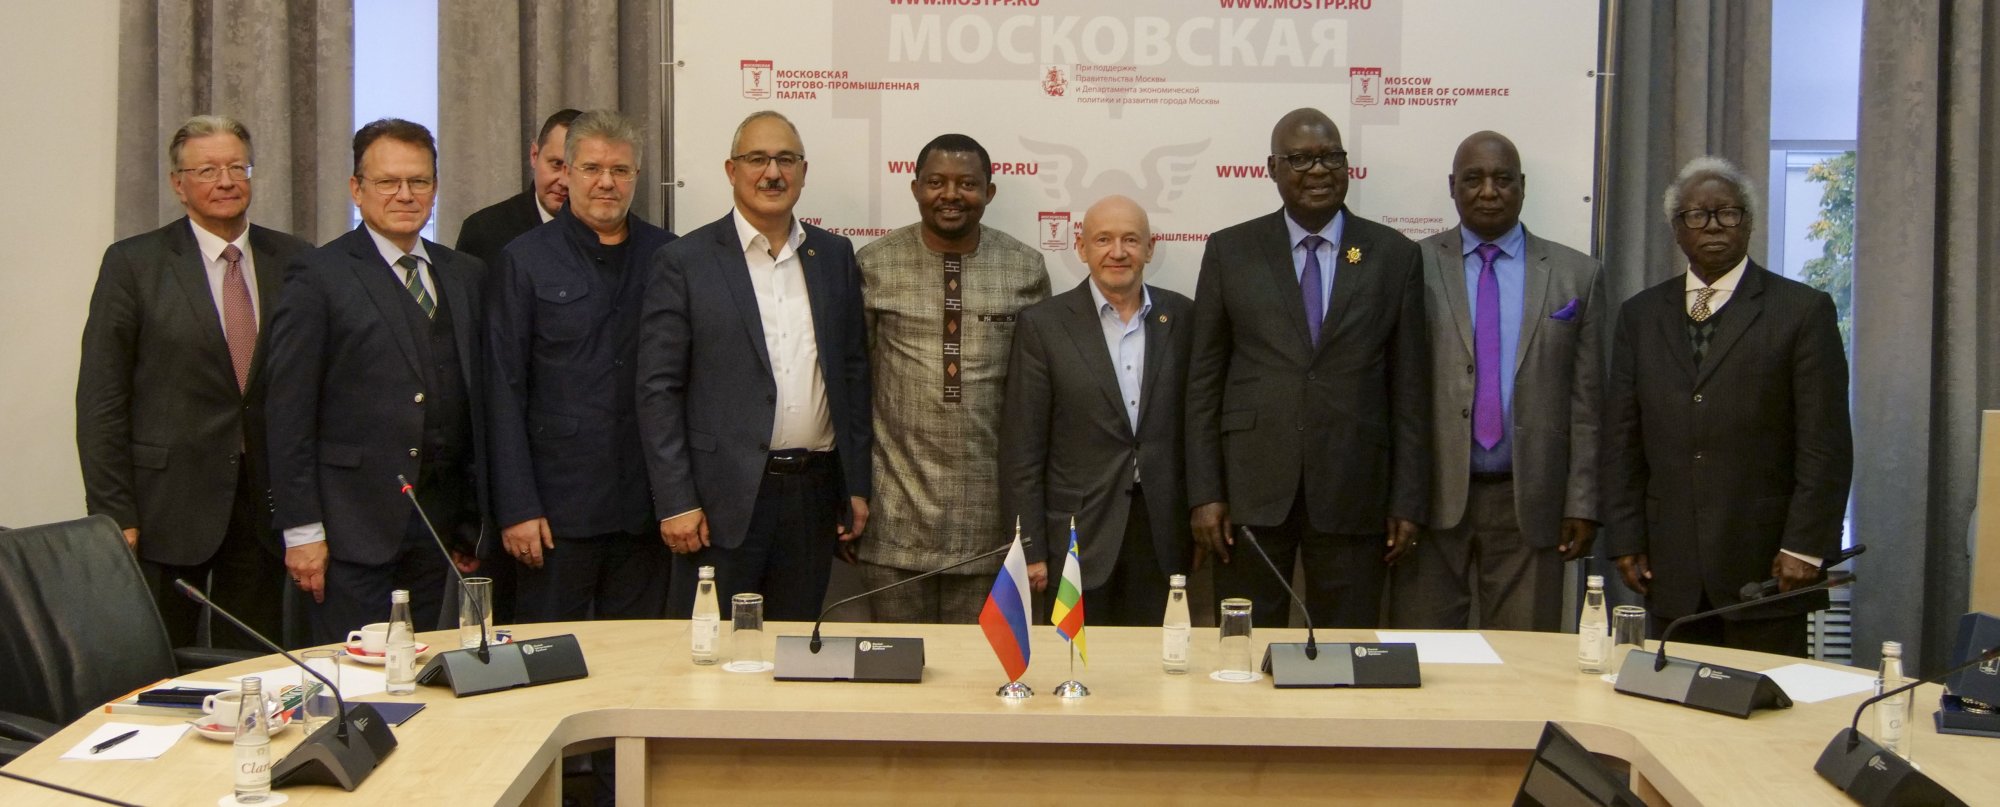 The delegation of the Central African Republic visited MССI